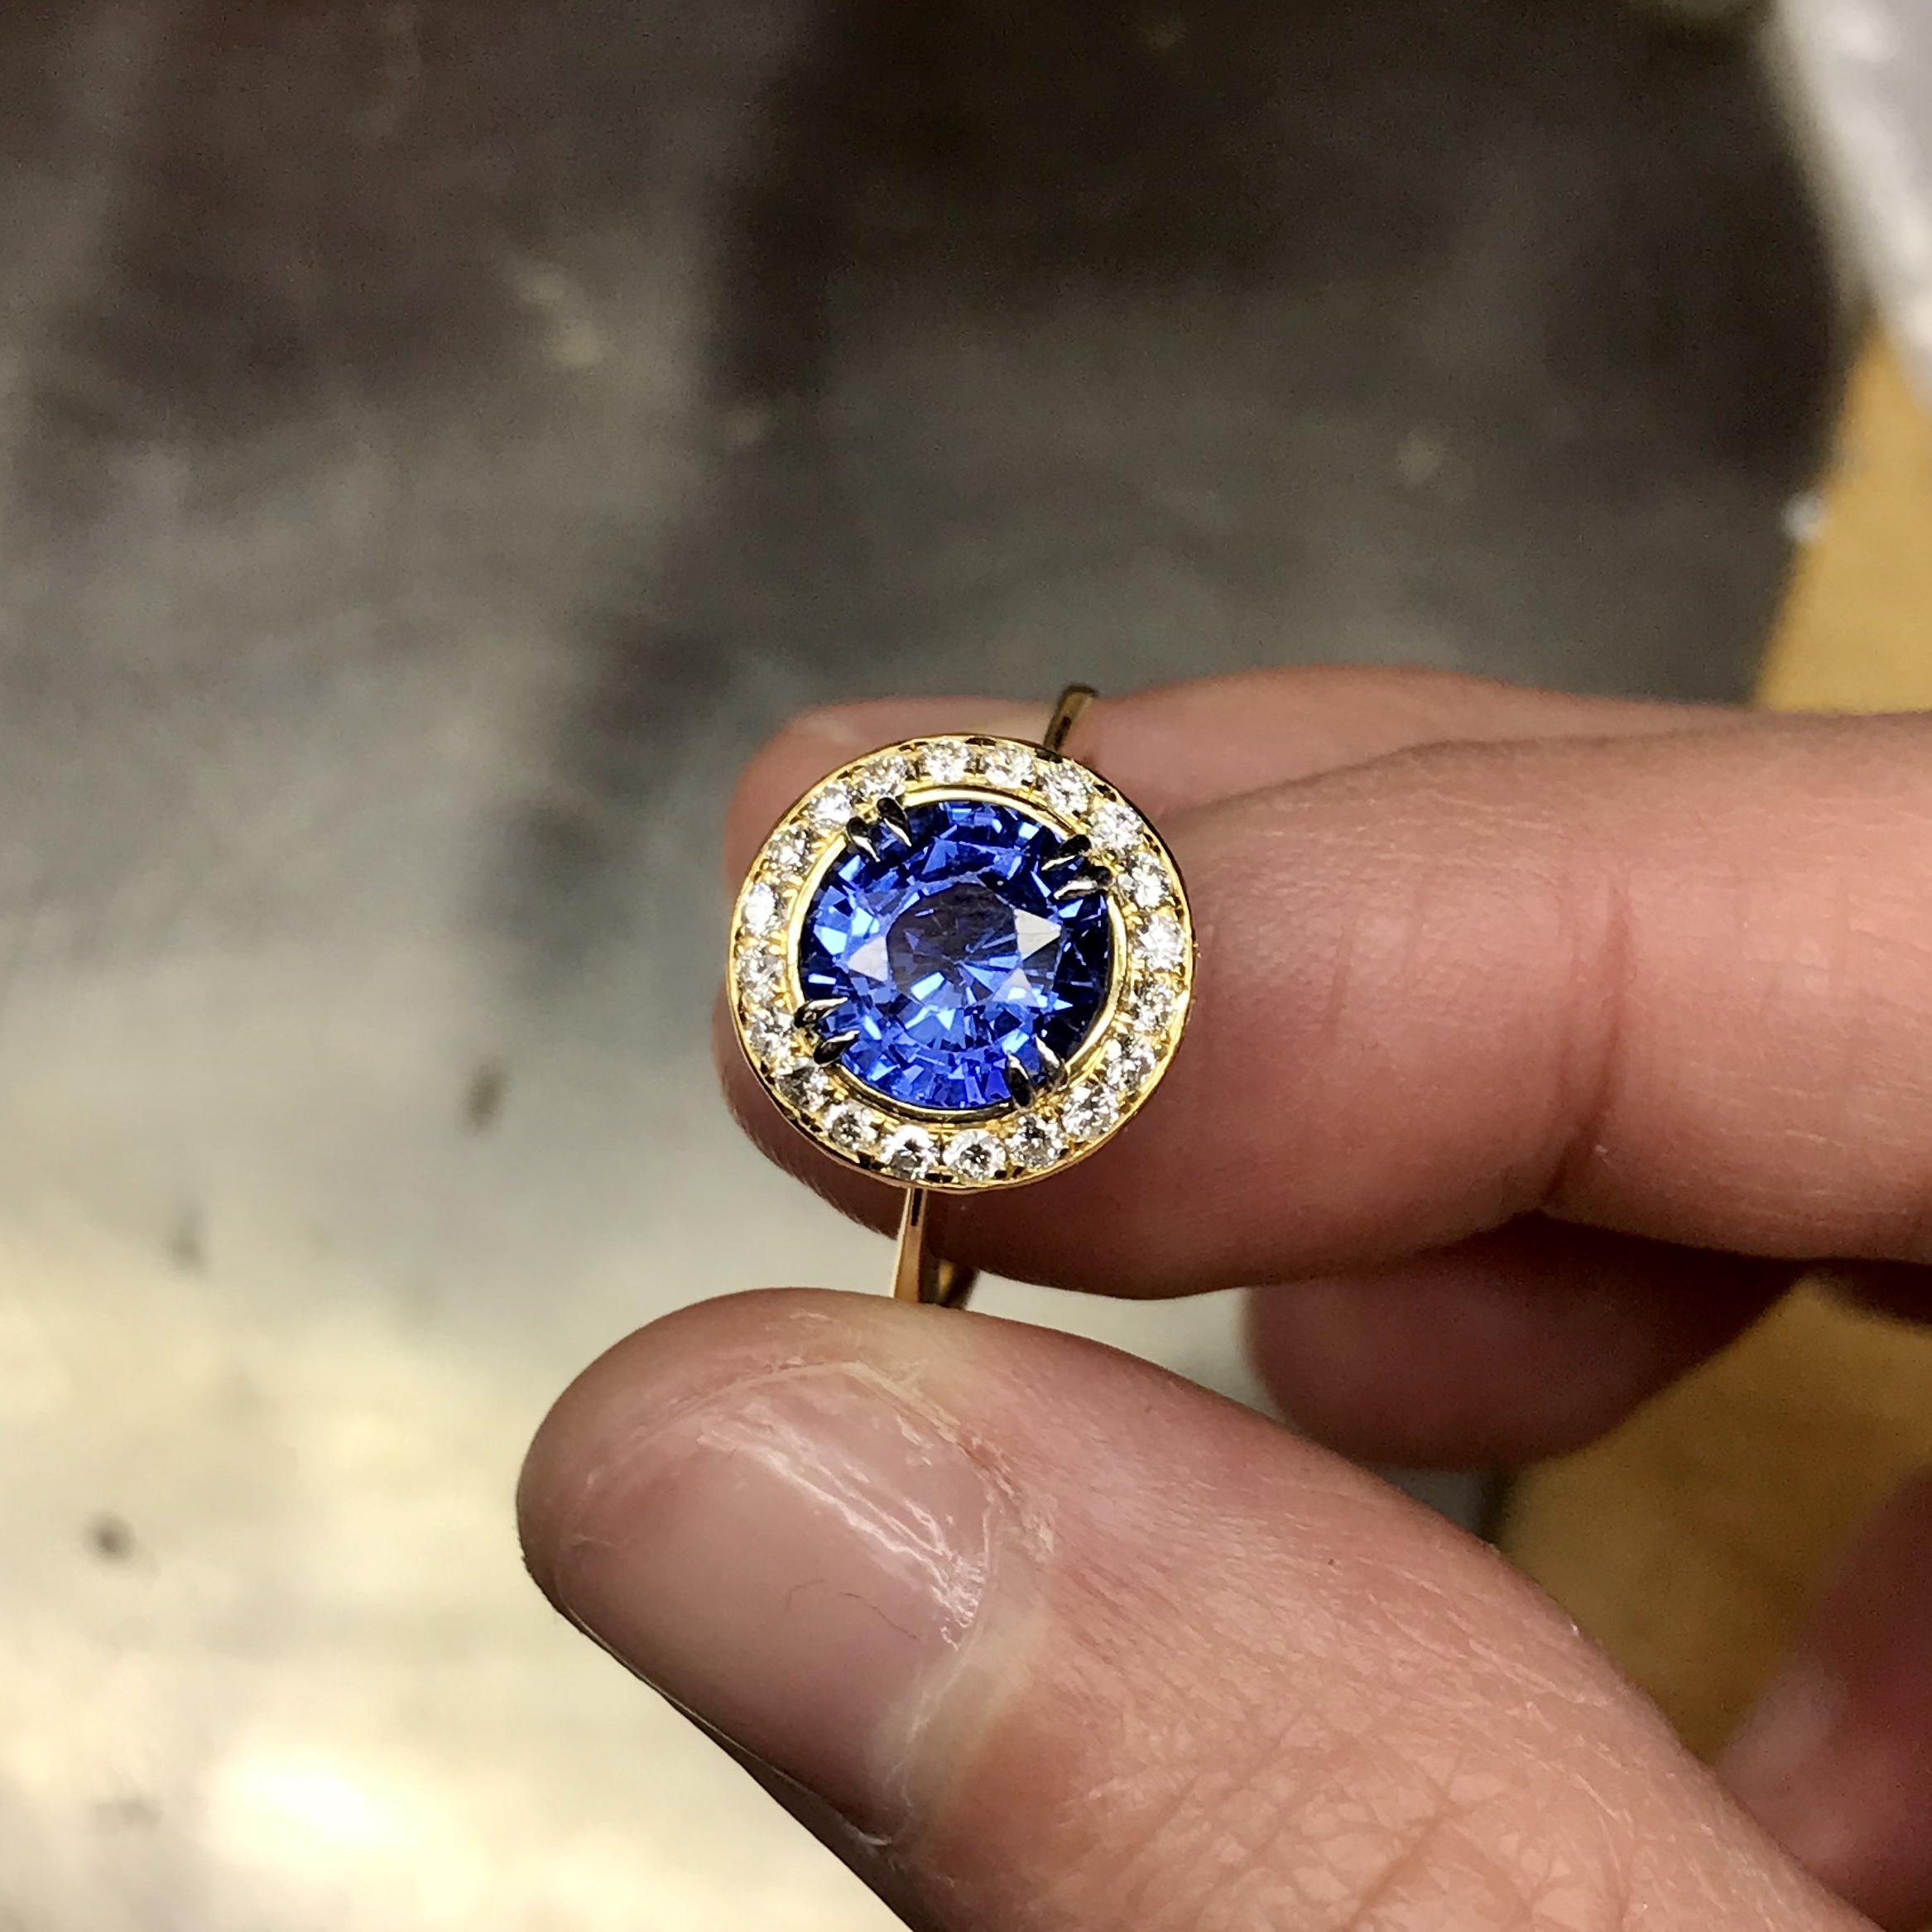 This is a photo of an 18k yellow gold 10mm Crownwork claw set Blue Sapphire ring with pave diamond surround